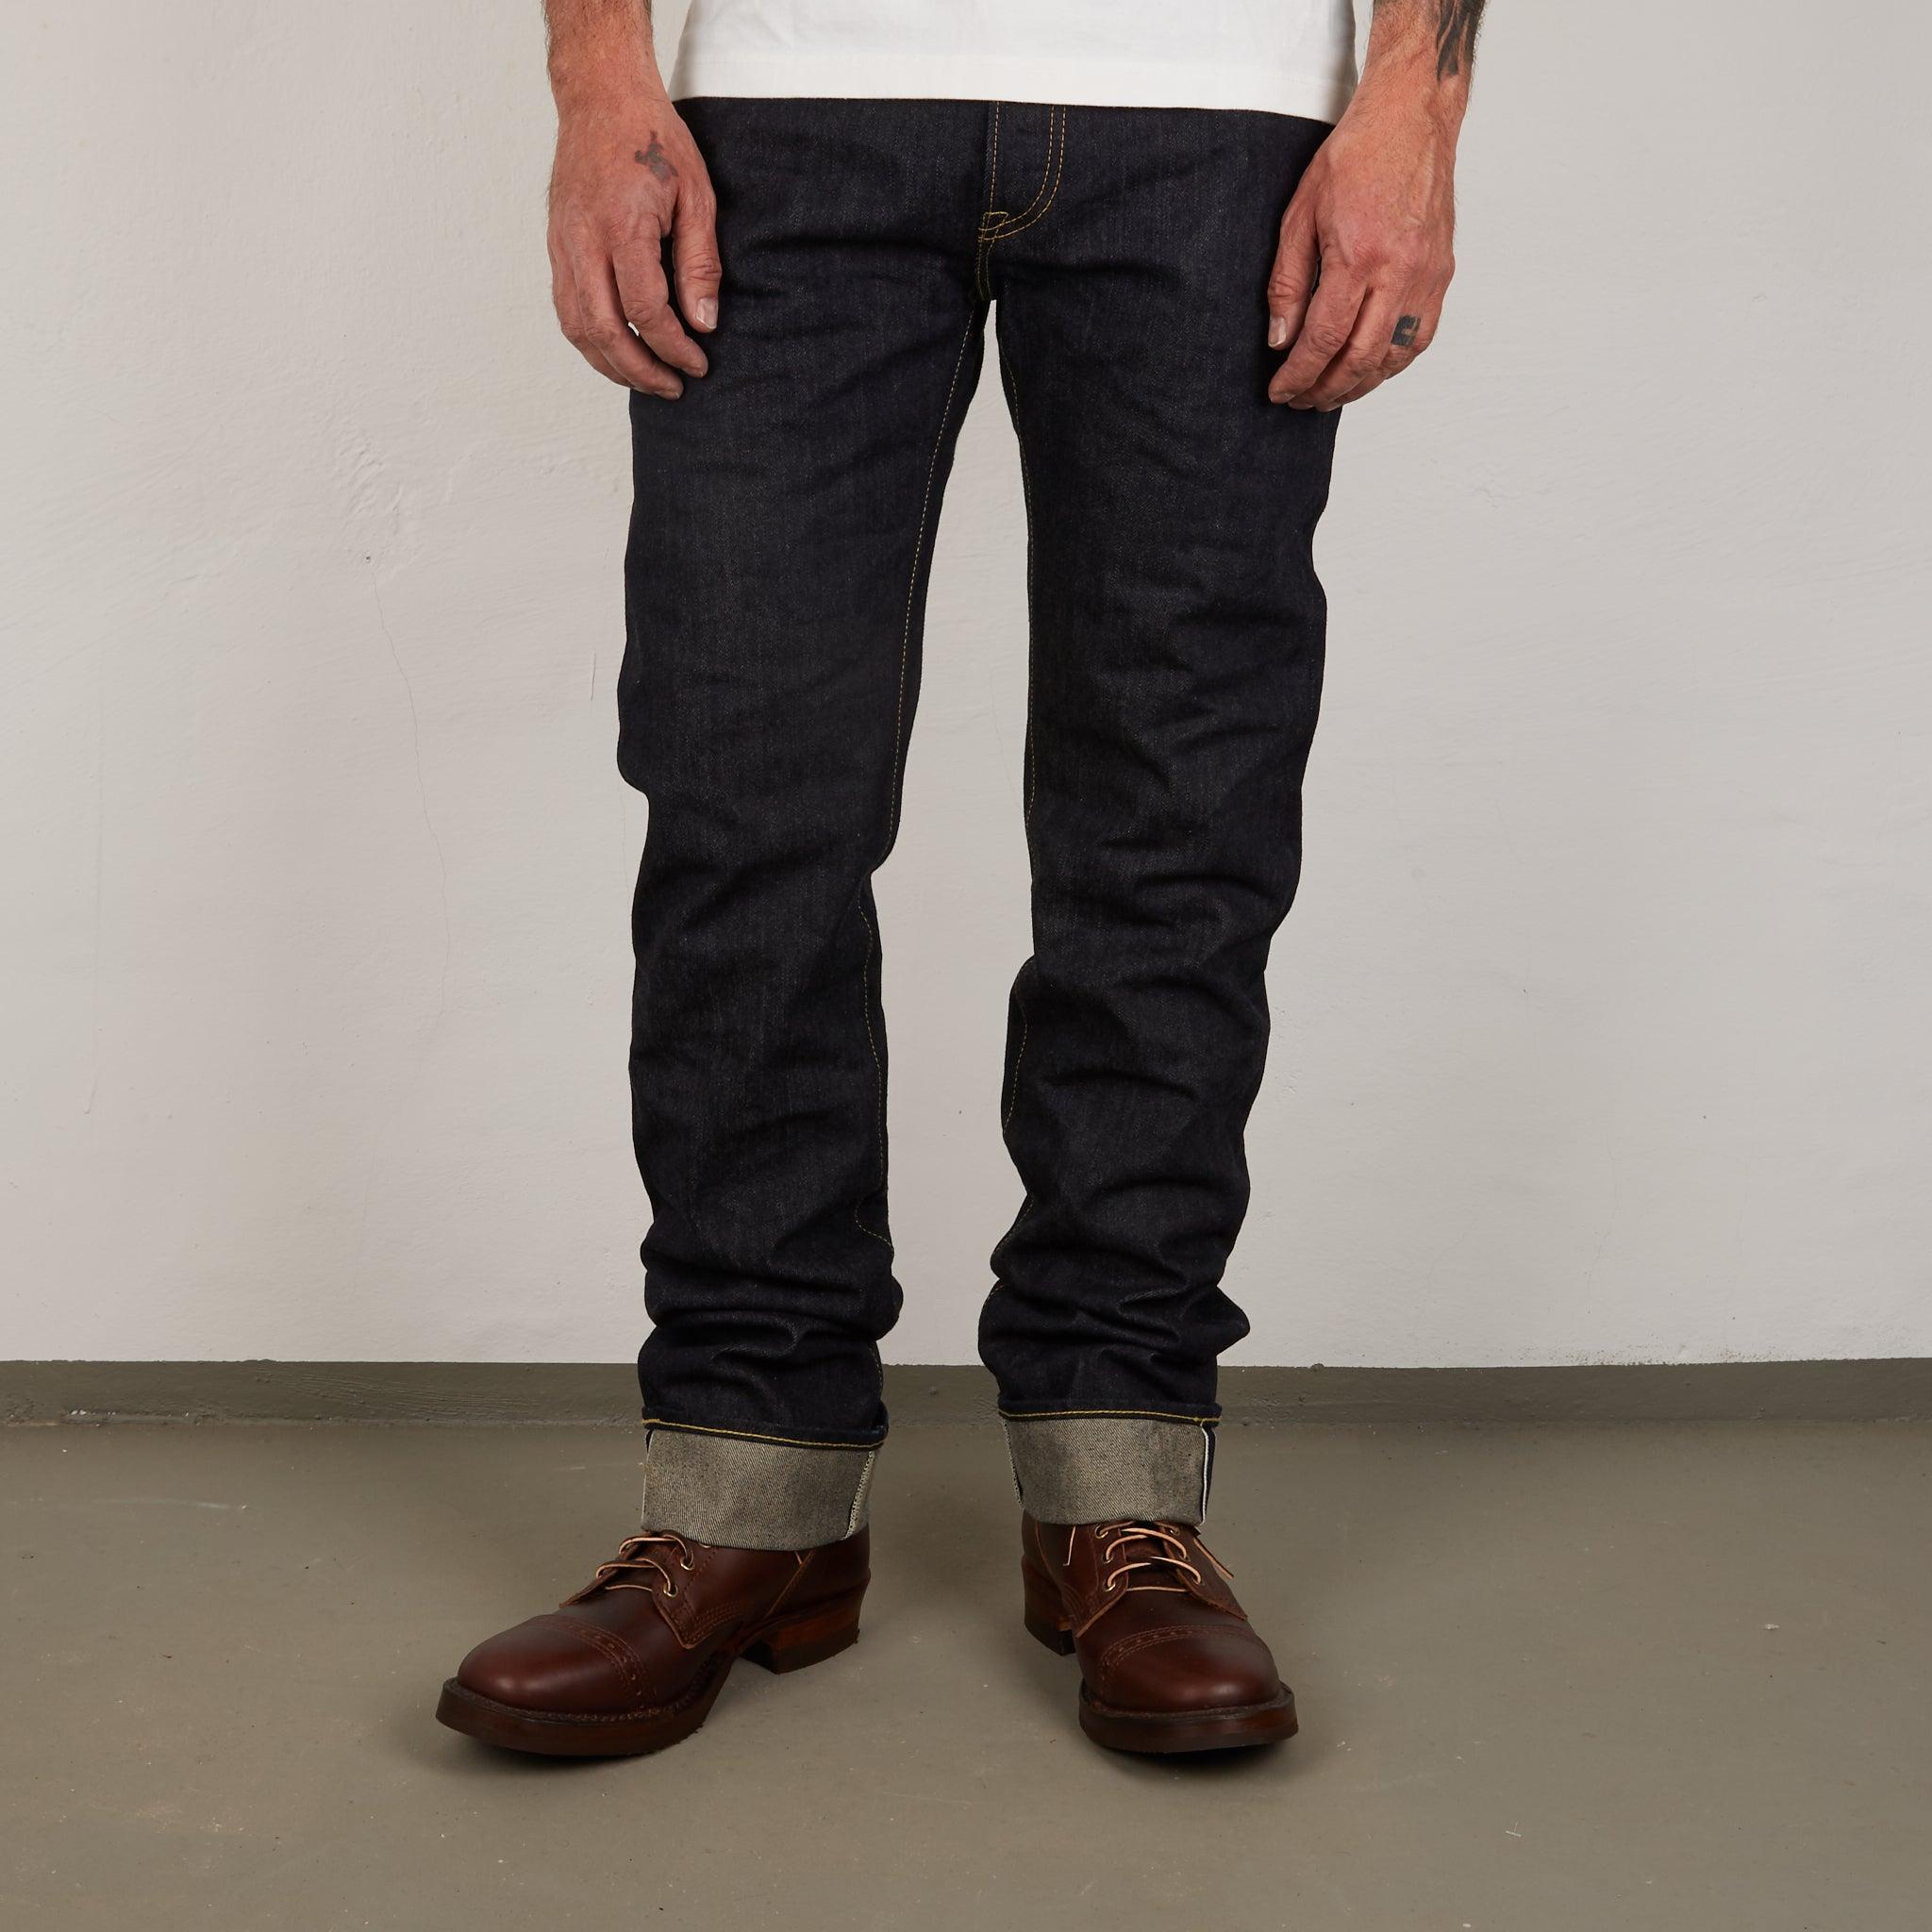 Image showing the IH-666S-142 - 14oz Selvedge Denim Slim Straight Cut Jeans - Indigo which is a Jeans described by the following info 666, Bottoms, Iron Heart, Jeans, Released, Slim, Straight and sold on the IRON HEART GERMANY online store